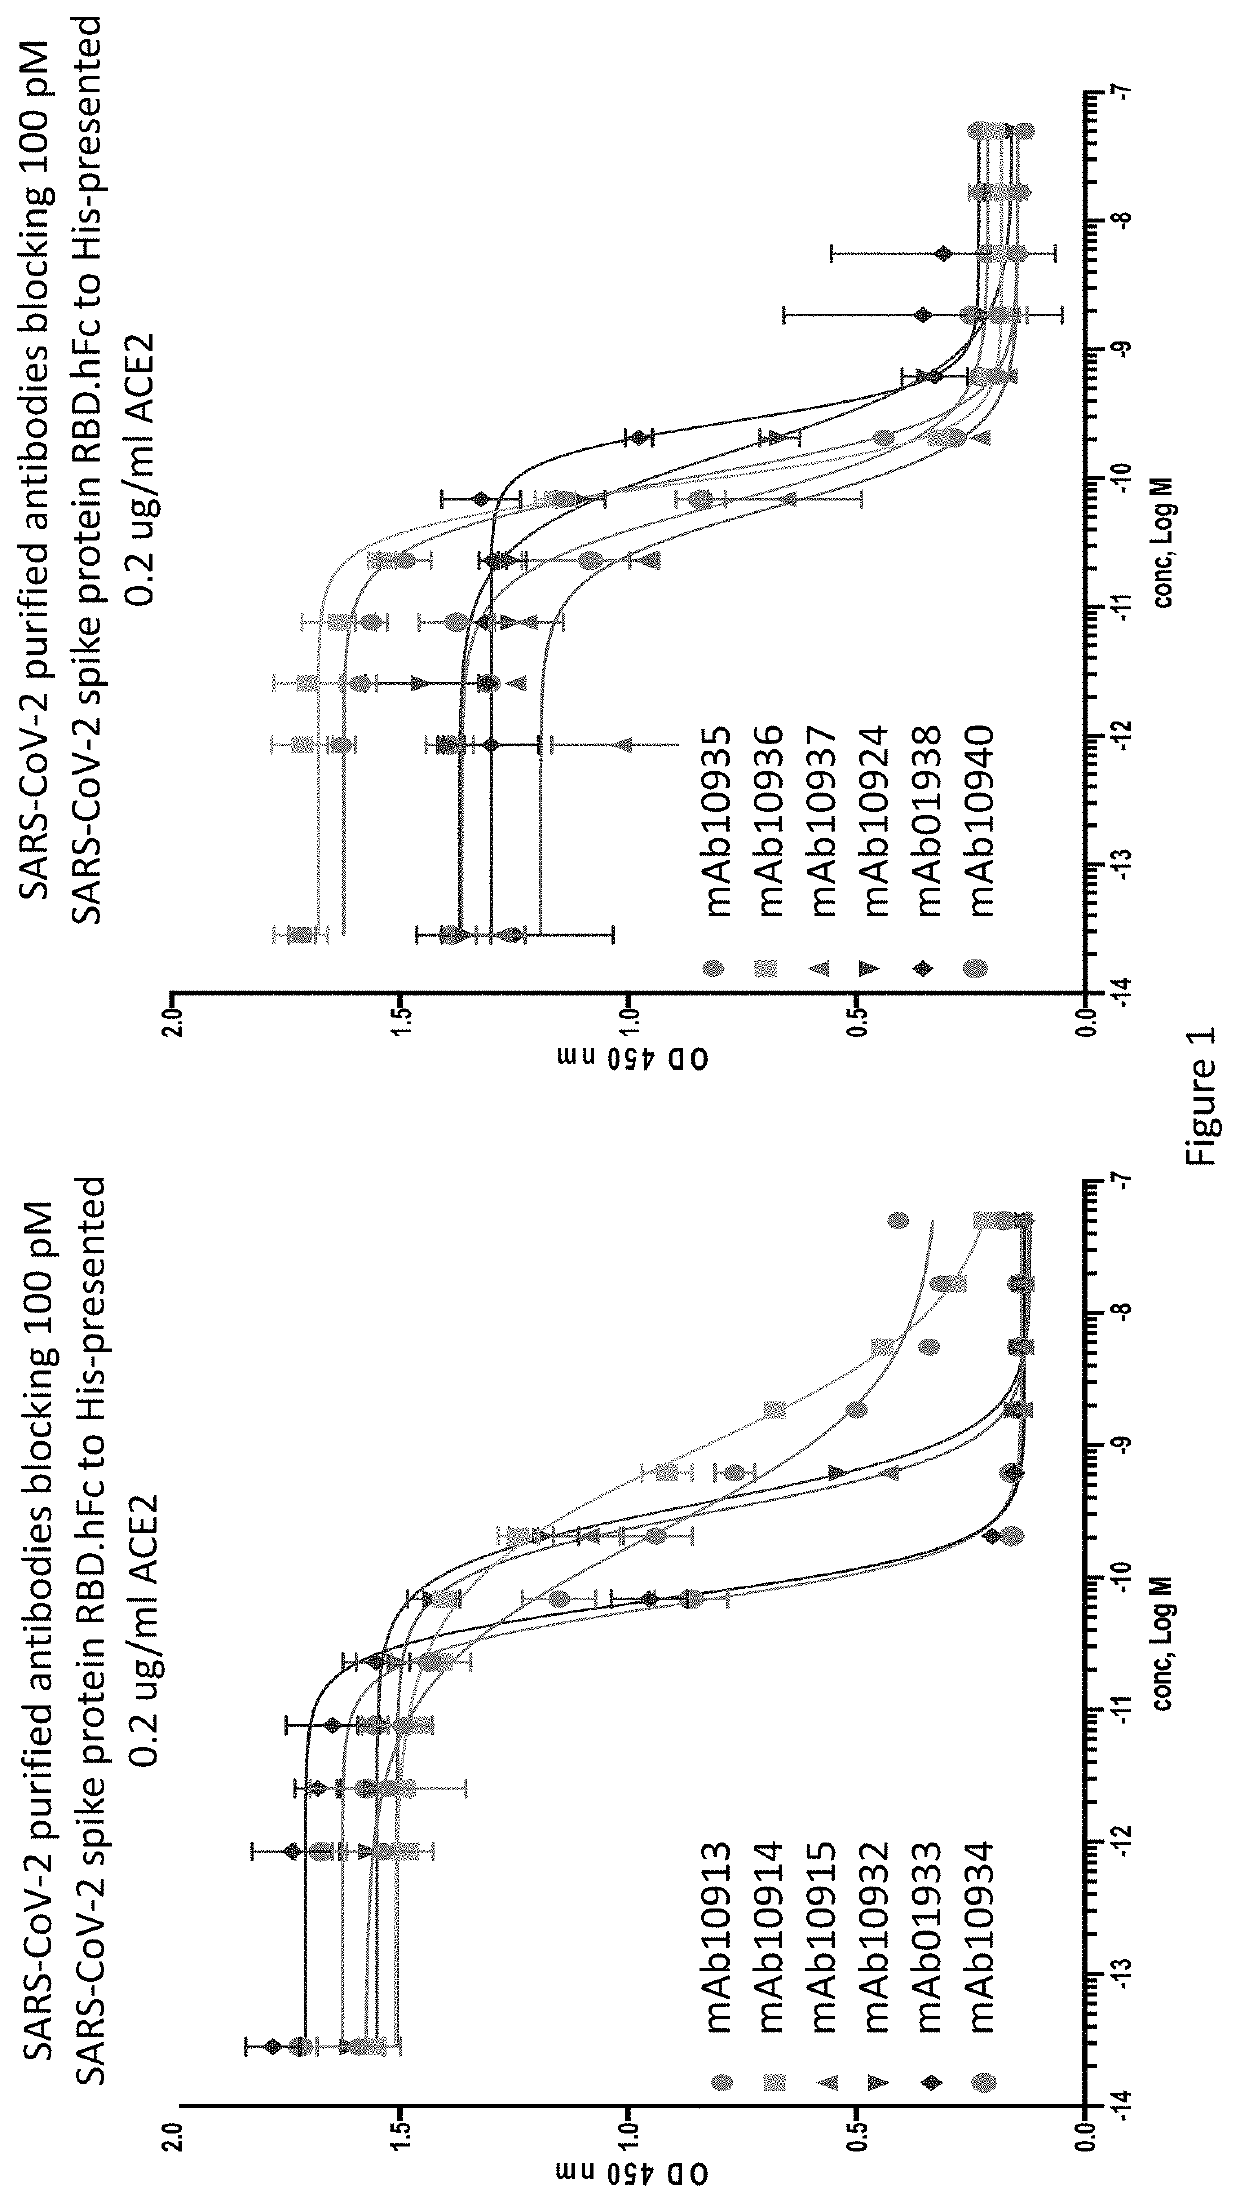 Anti-SARS-CoV-2-spike glycoprotein antibodies and antigen-binding fragments